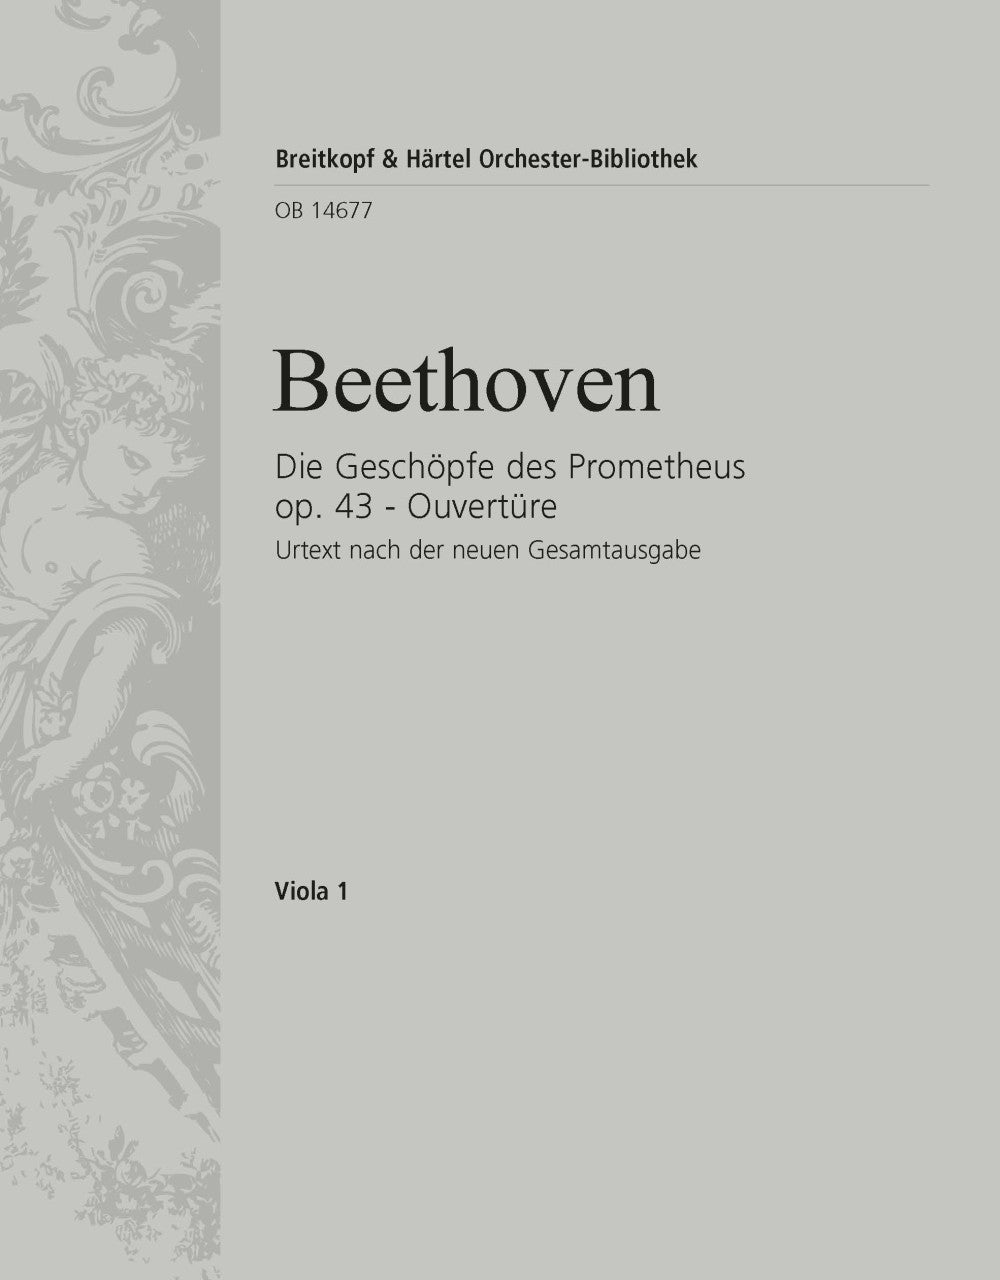 Beethoven: Overture to The Creatures of Prometheus, Op. 43